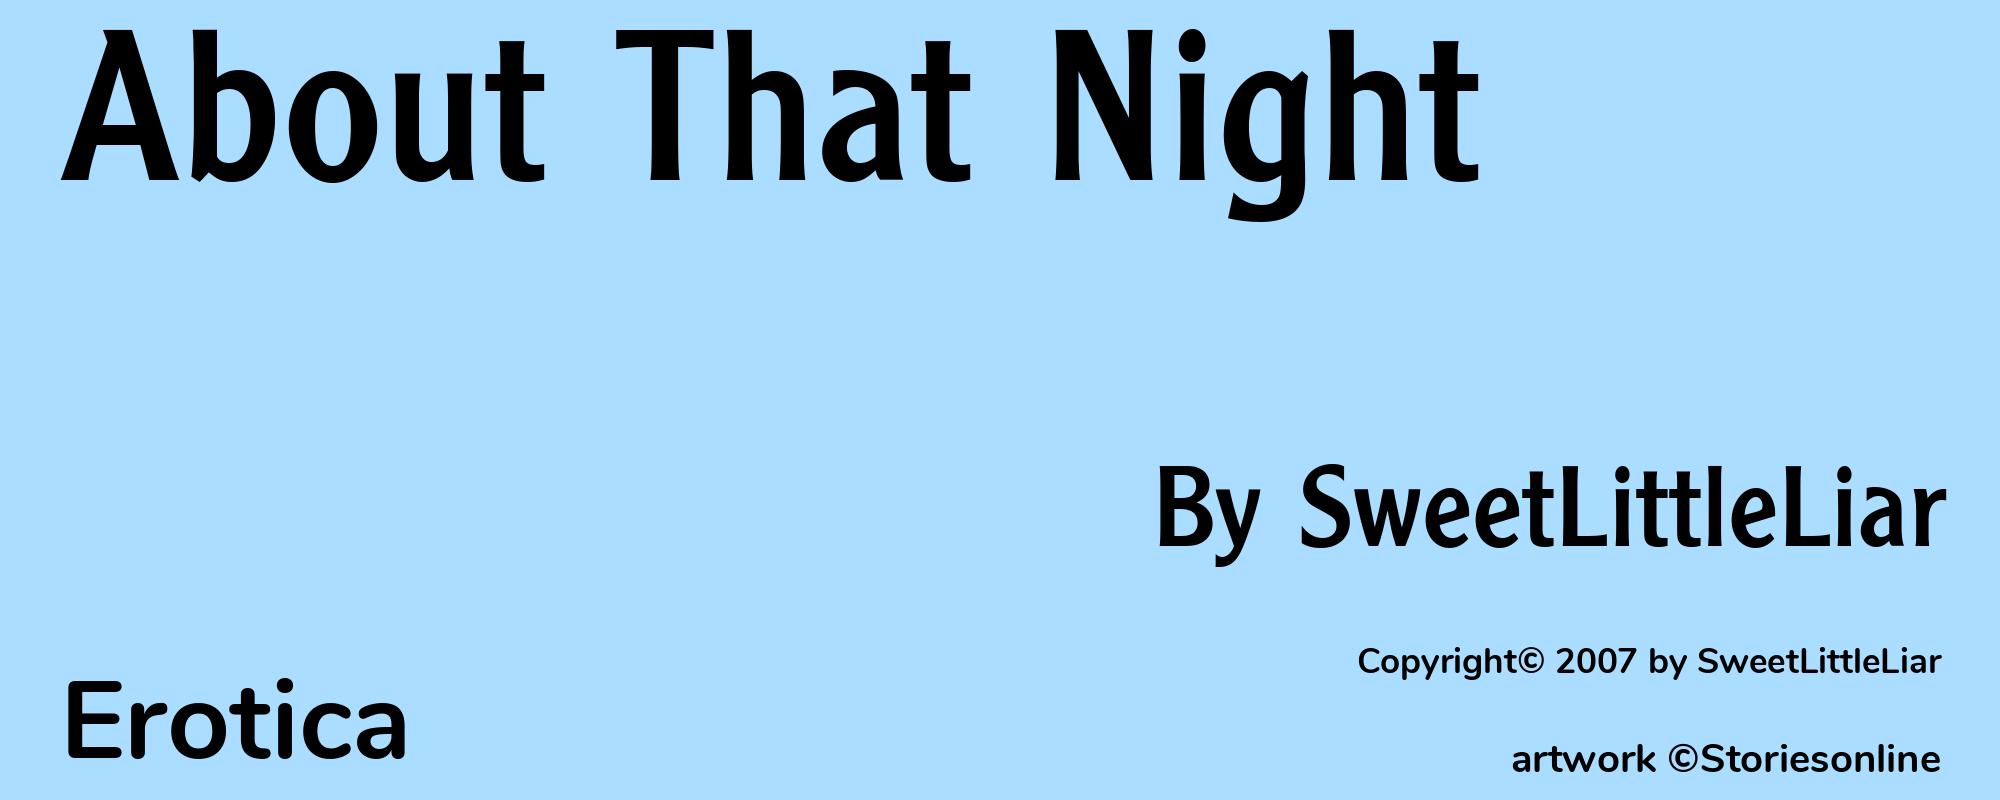 About That Night - Cover